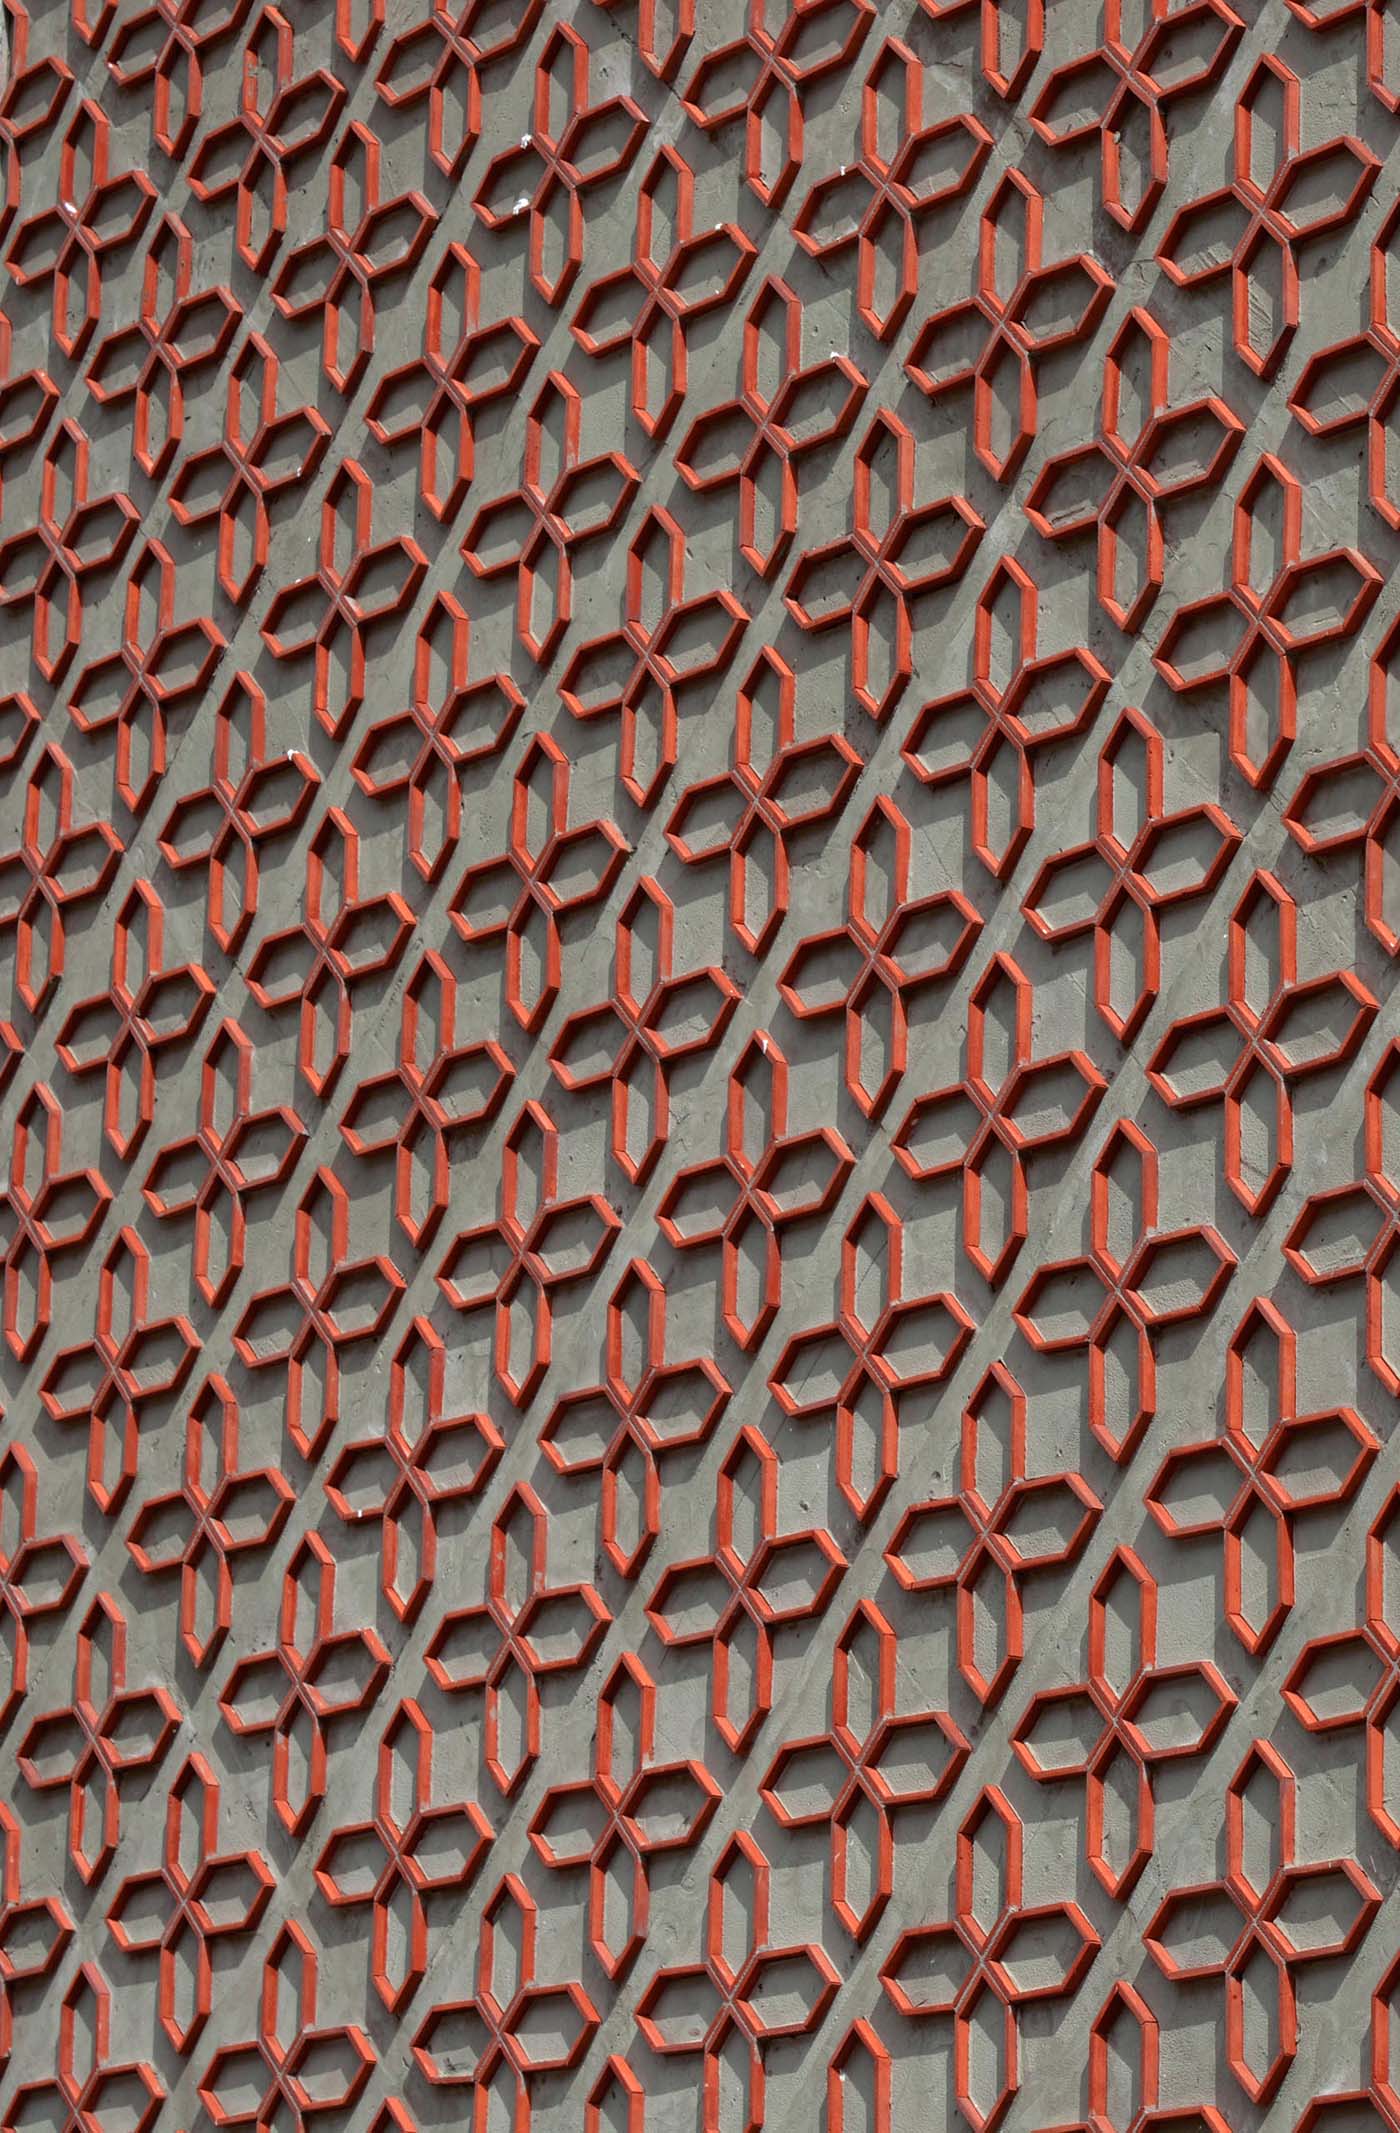 A patterned wall made from cut clay roof tiles.